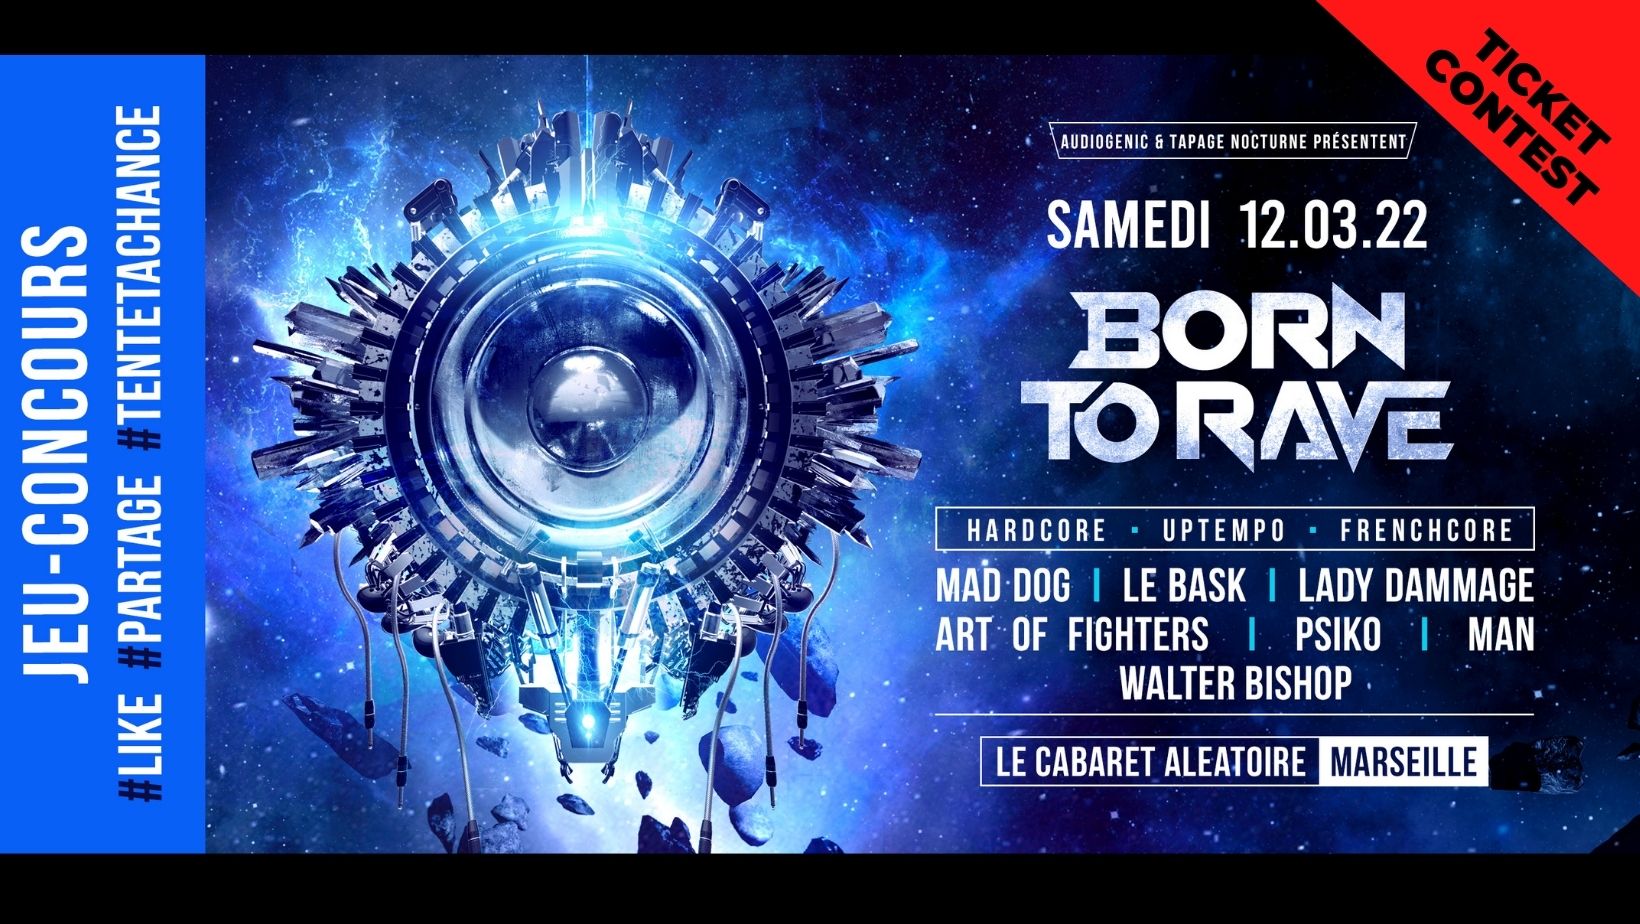 Born to Rave 2022 in Marseille